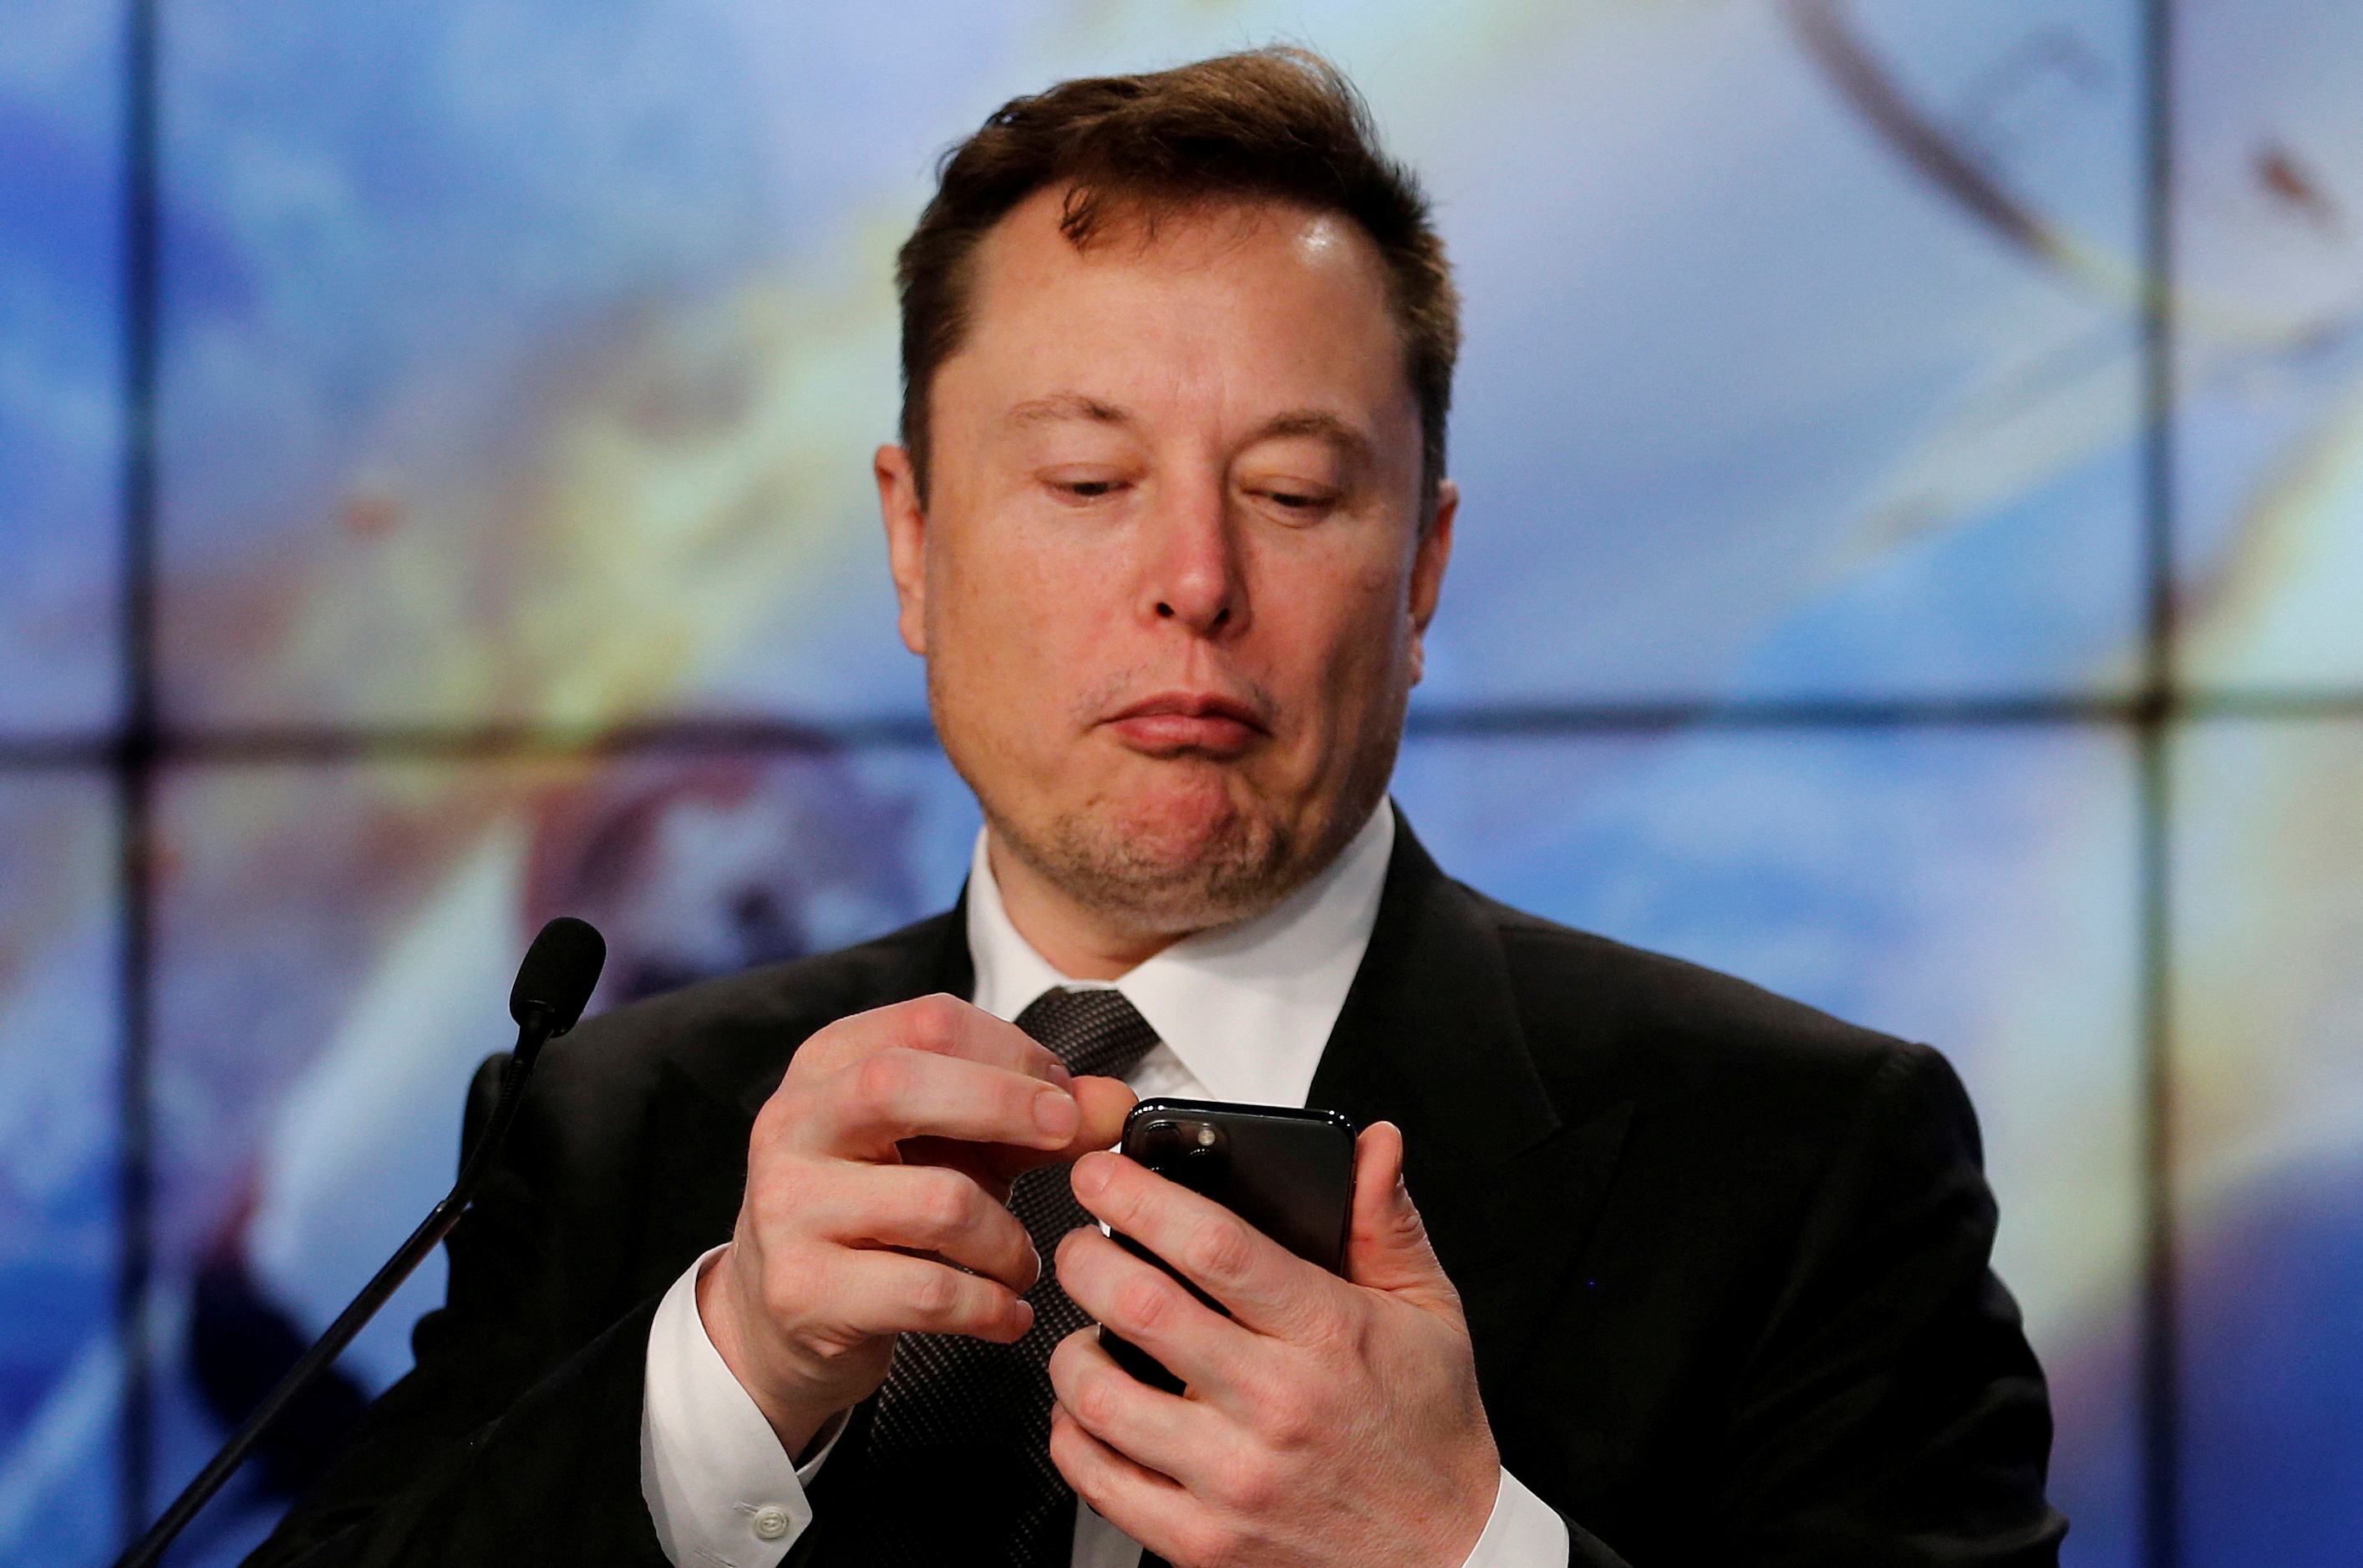 Elon Musk hints layoffs at Twitter in future, employees doing ‘excellent’ work can work from home